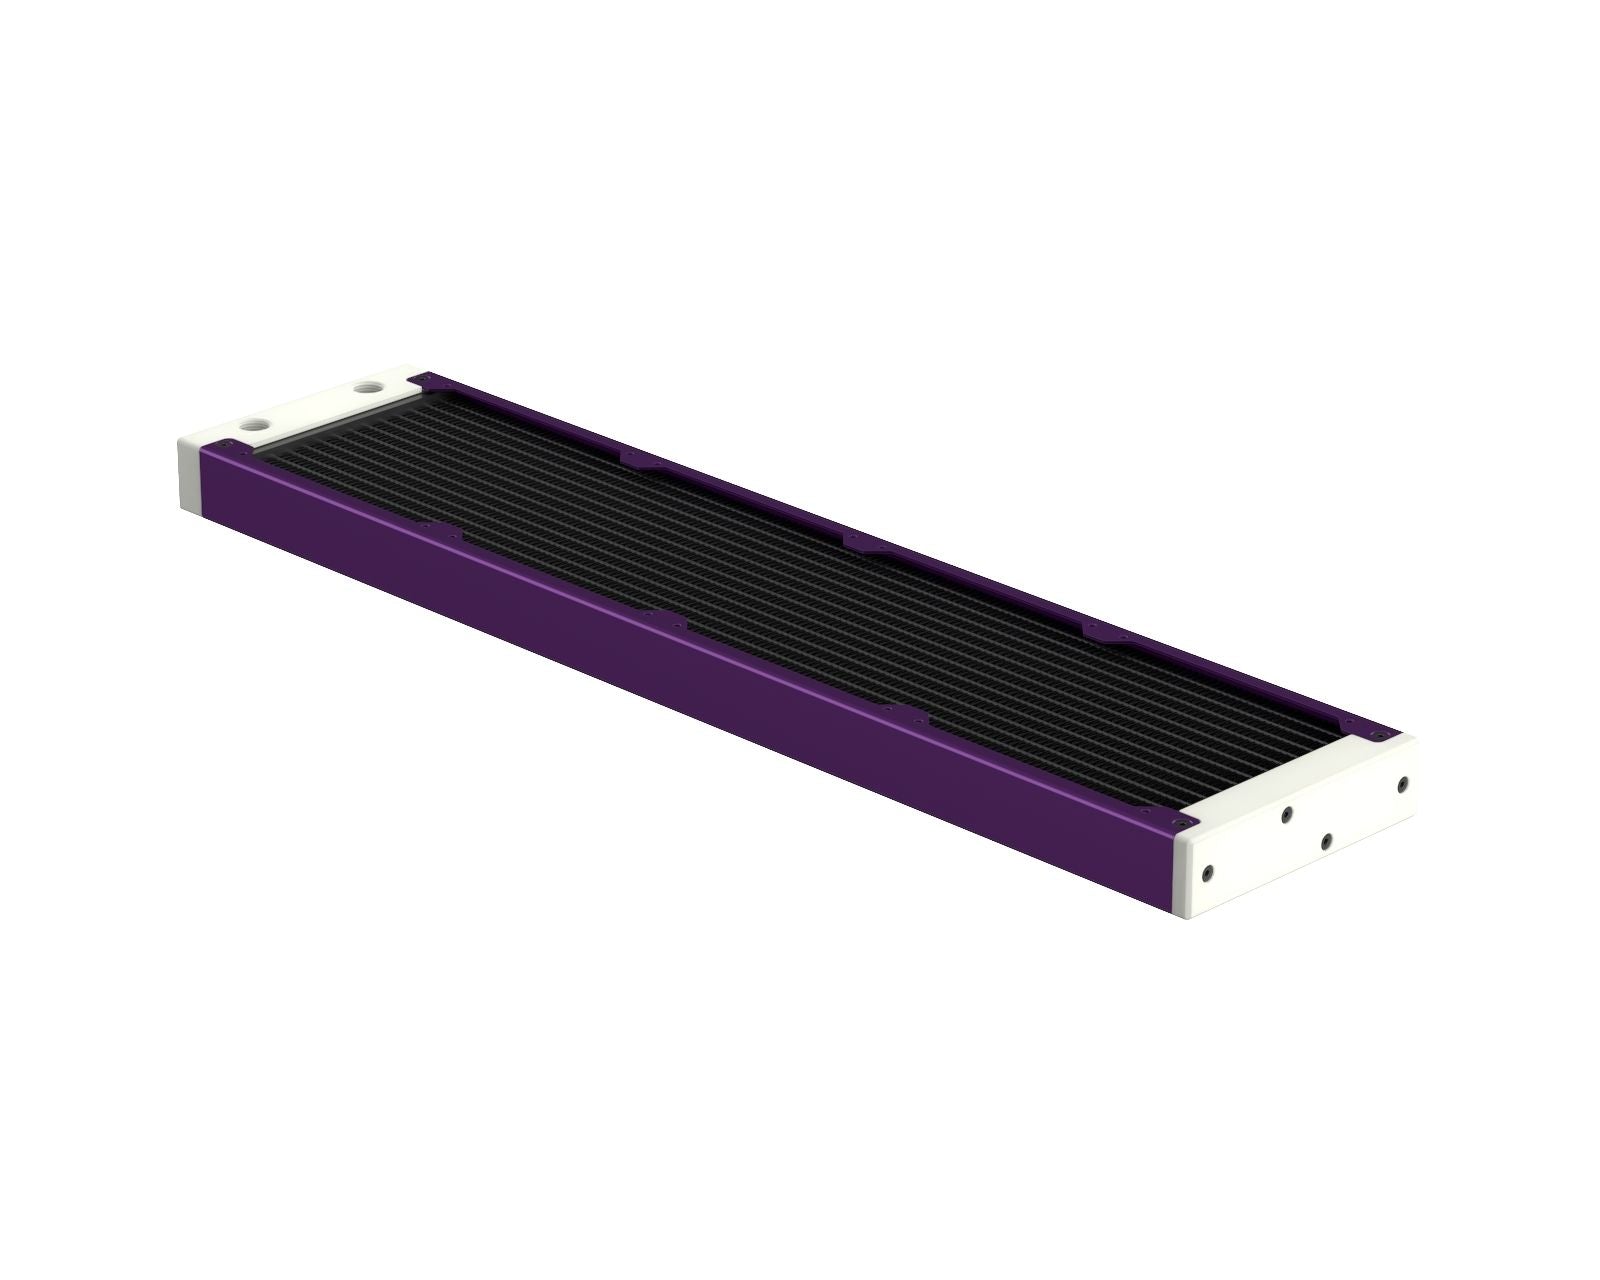 PrimoChill 480SL (30mm) EXIMO Modular Radiator, White POM, 4x120mm, Quad Fan (R-SL-W48) Available in 20+ Colors, Assembled in USA and Custom Watercooling Loop Ready - Candy Purple